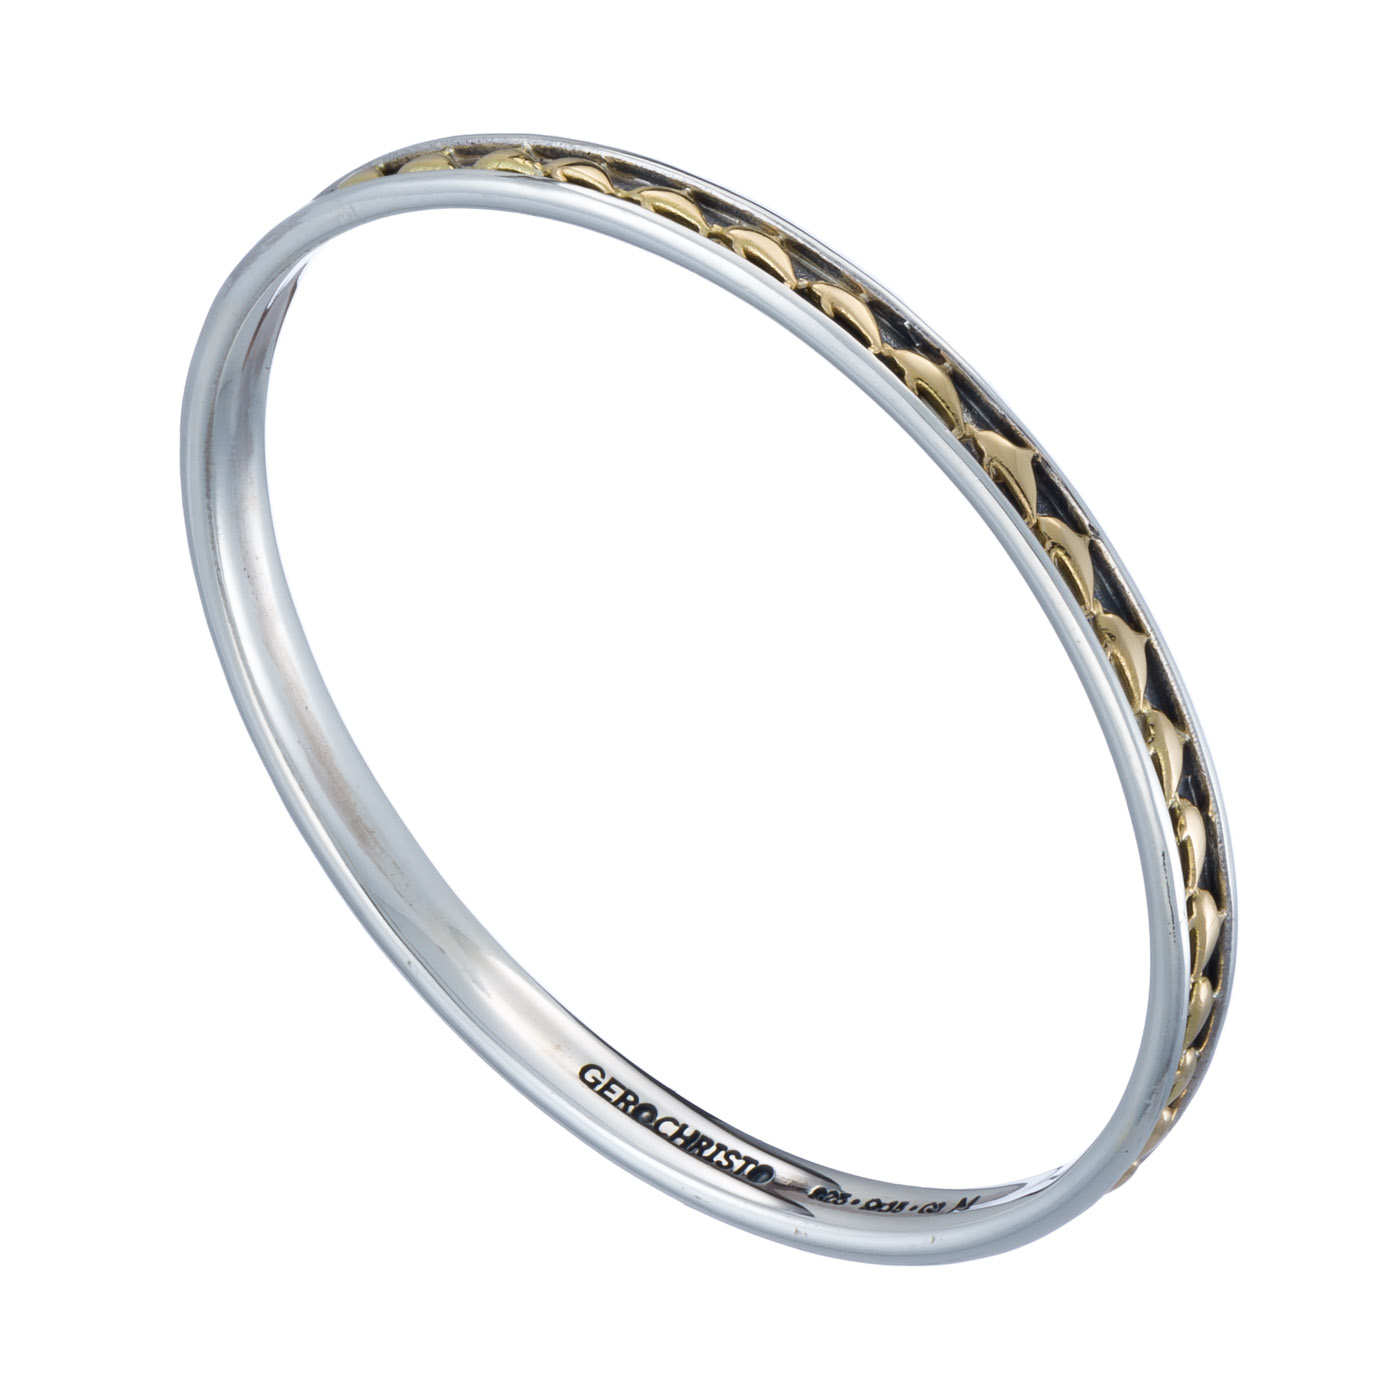 Dolphins Bangle bracelet in 18K Gold and sterling silver